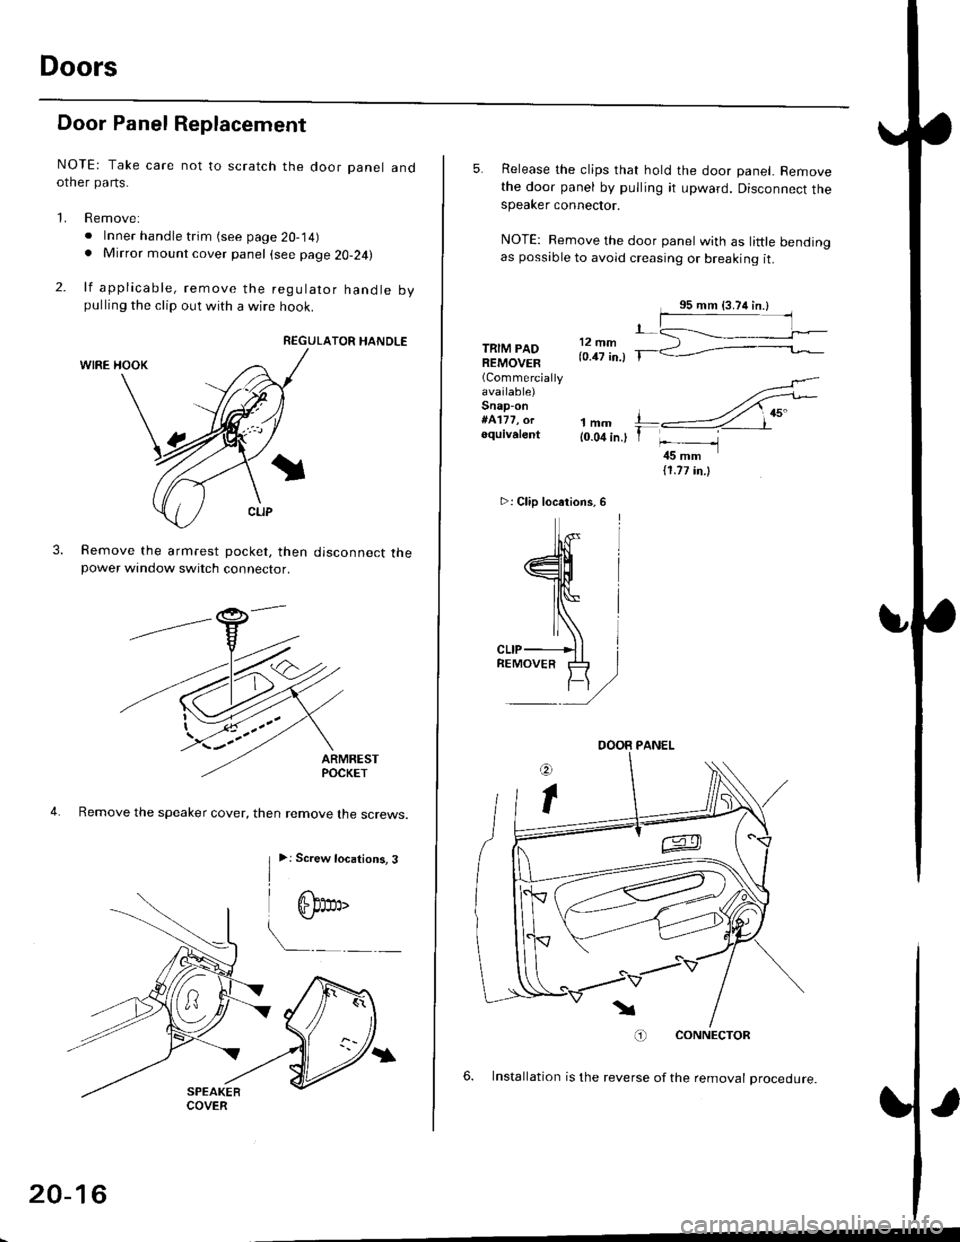 HONDA CIVIC 2000 6.G Workshop Manual Doors
Door Panel Replacement
NOTE: Take care not to scratch the door panel andother pa rts.
1. Remove:
. Inner handle trim (see page 20-14). Mirror mount cover panel (see page 20-24)
2. lf applicable